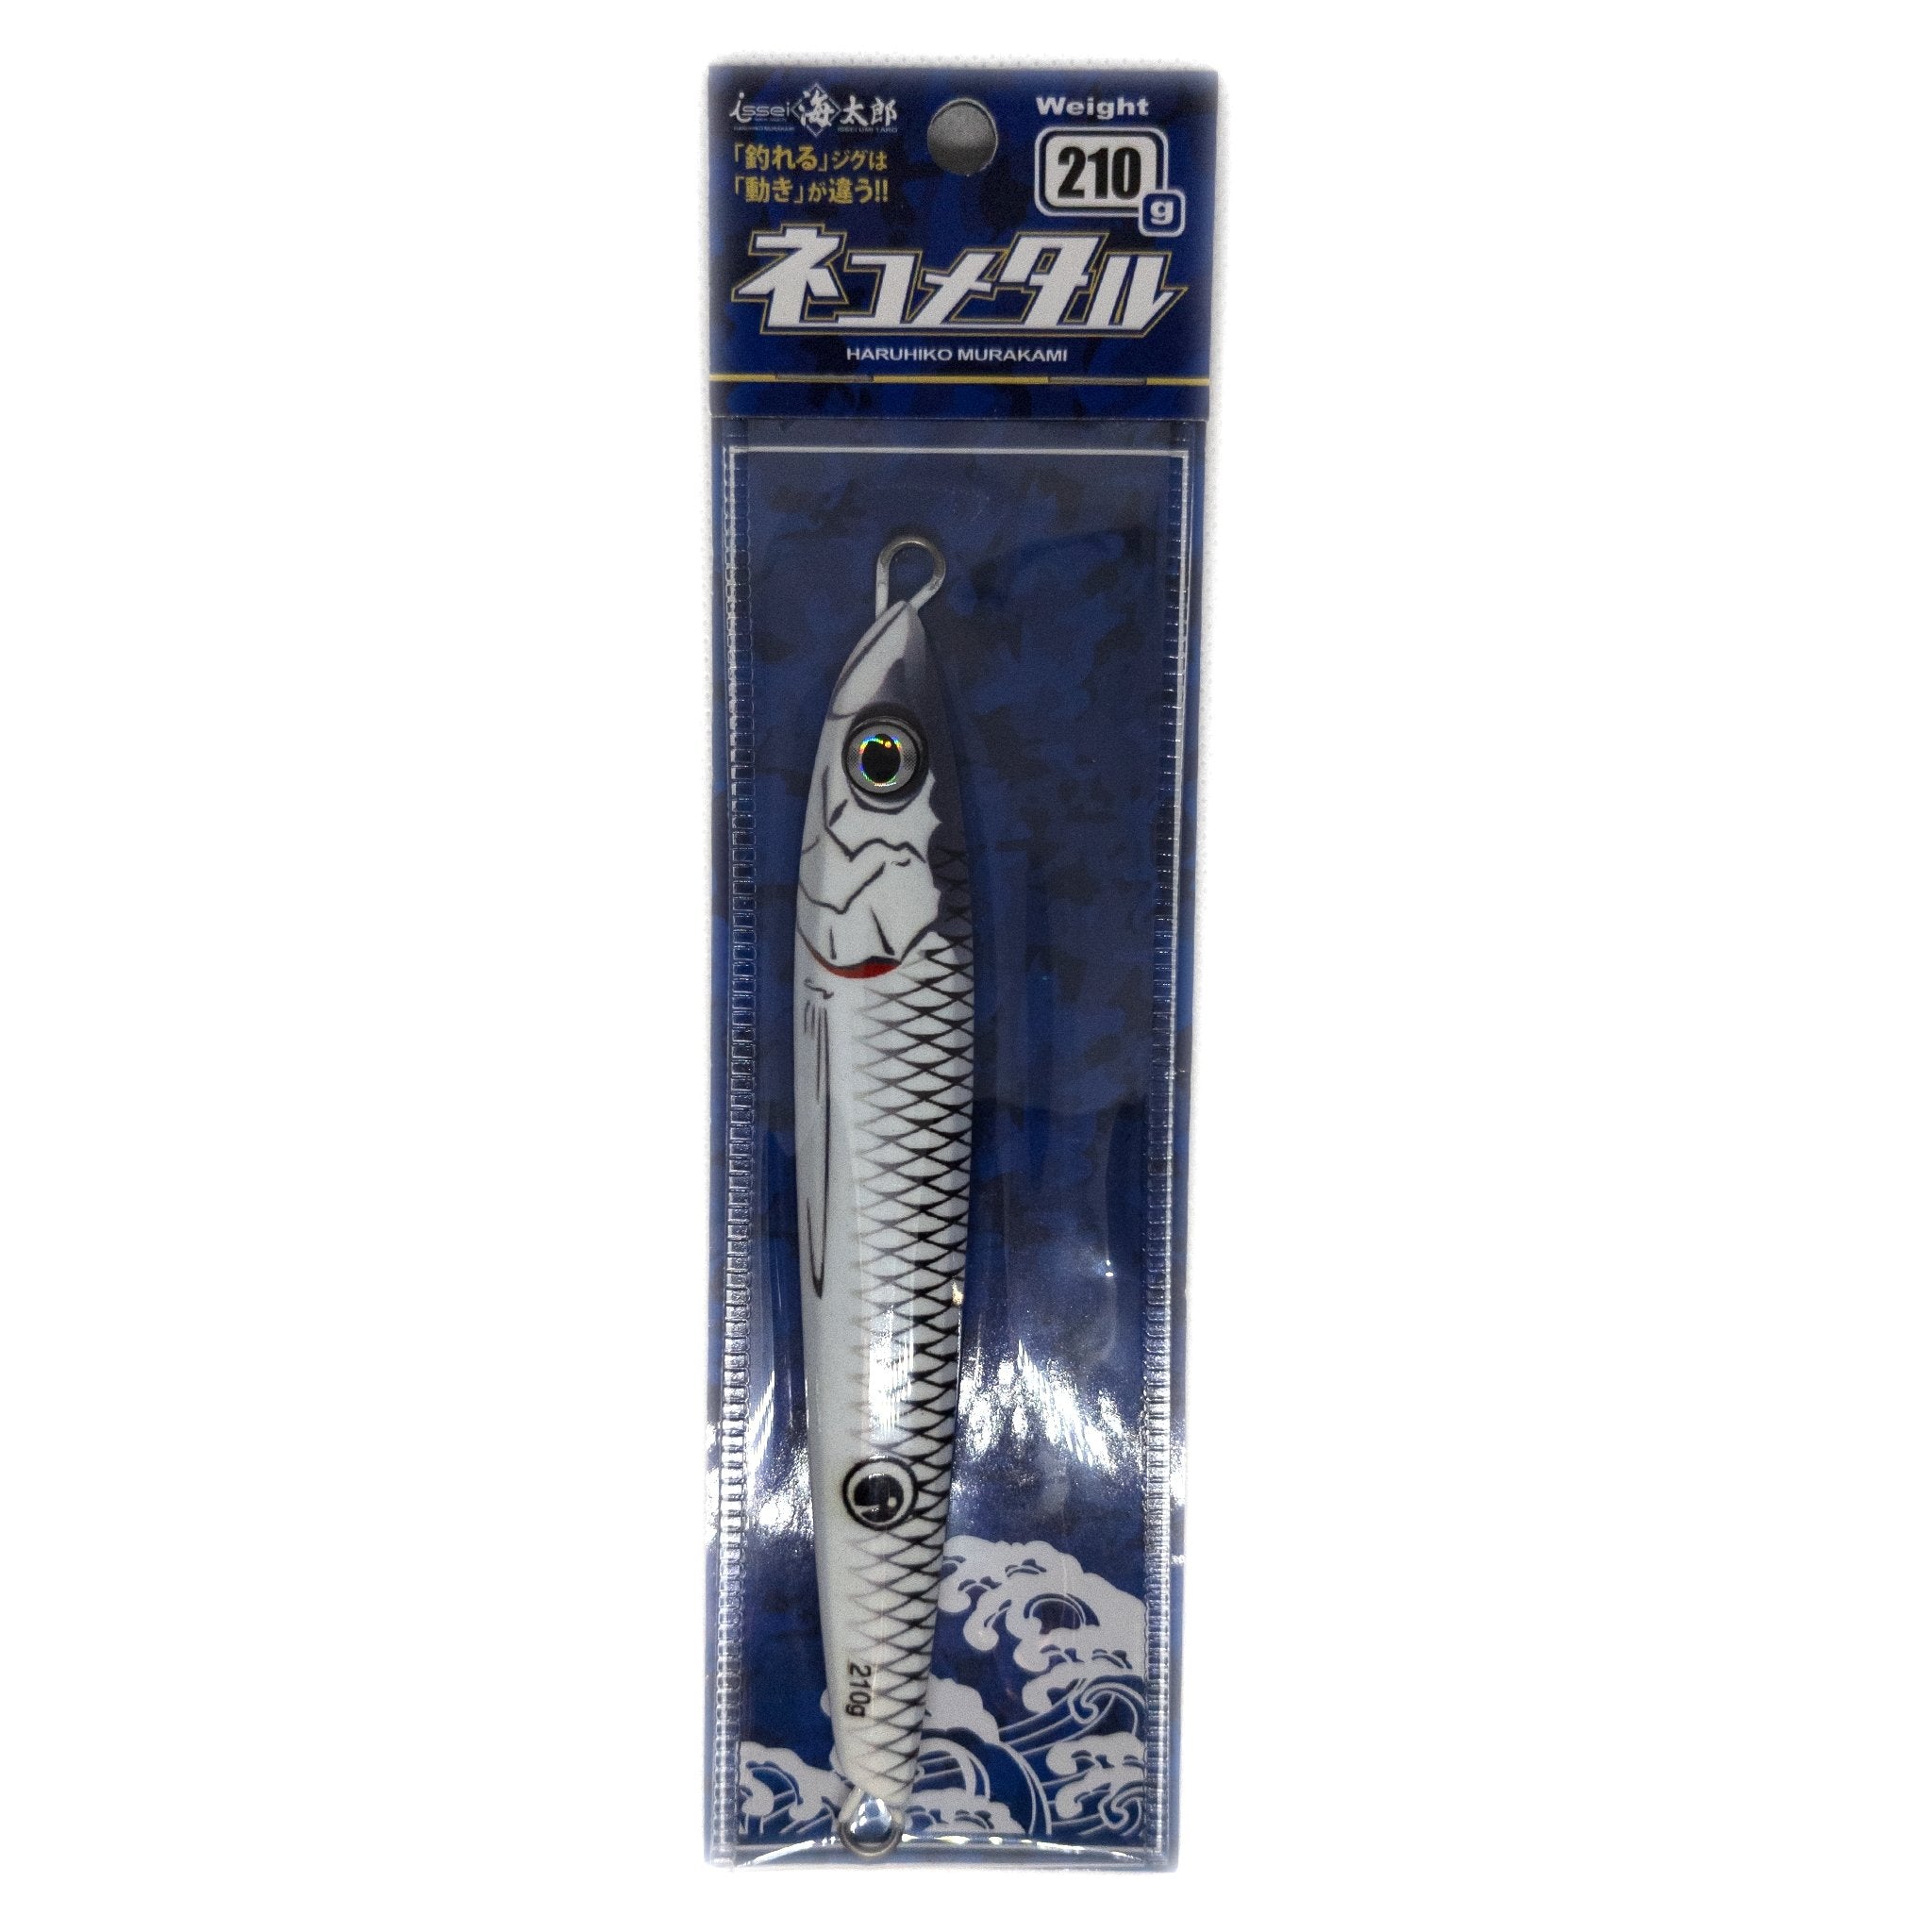 JDM Trout Lures – The Borrowed Lure